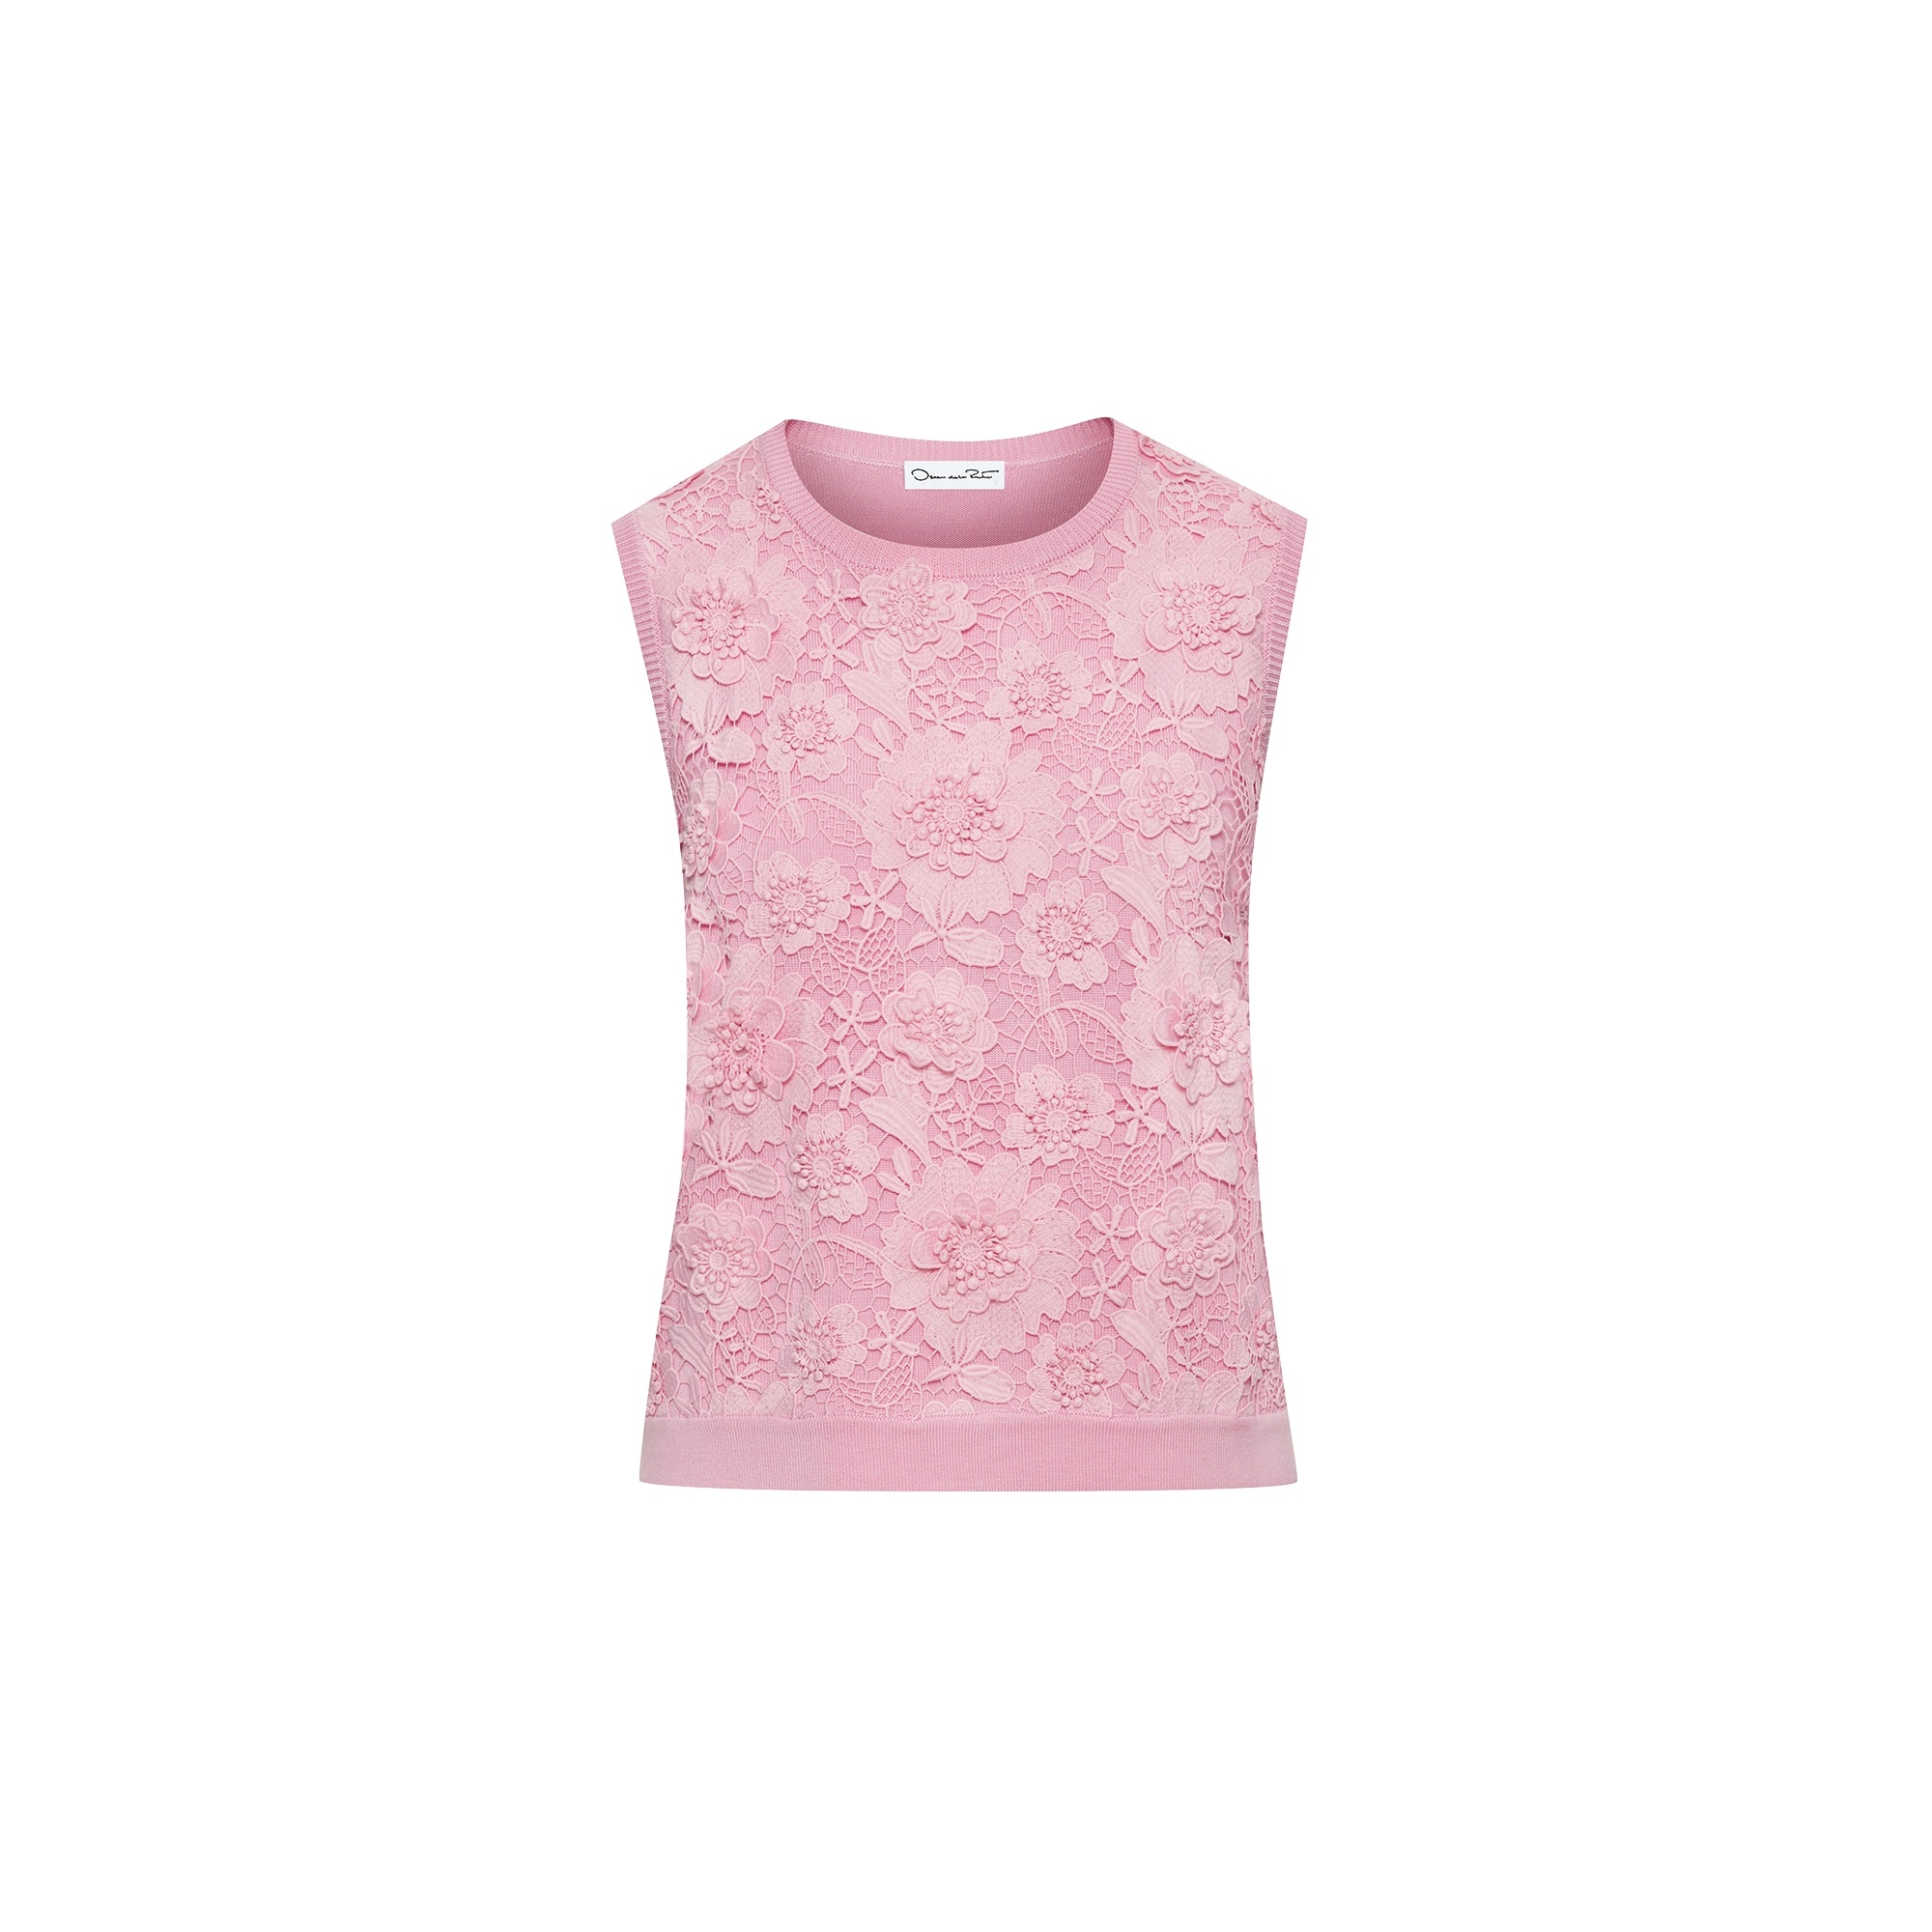 FLORAL GUIPURE INSET TANK - 5